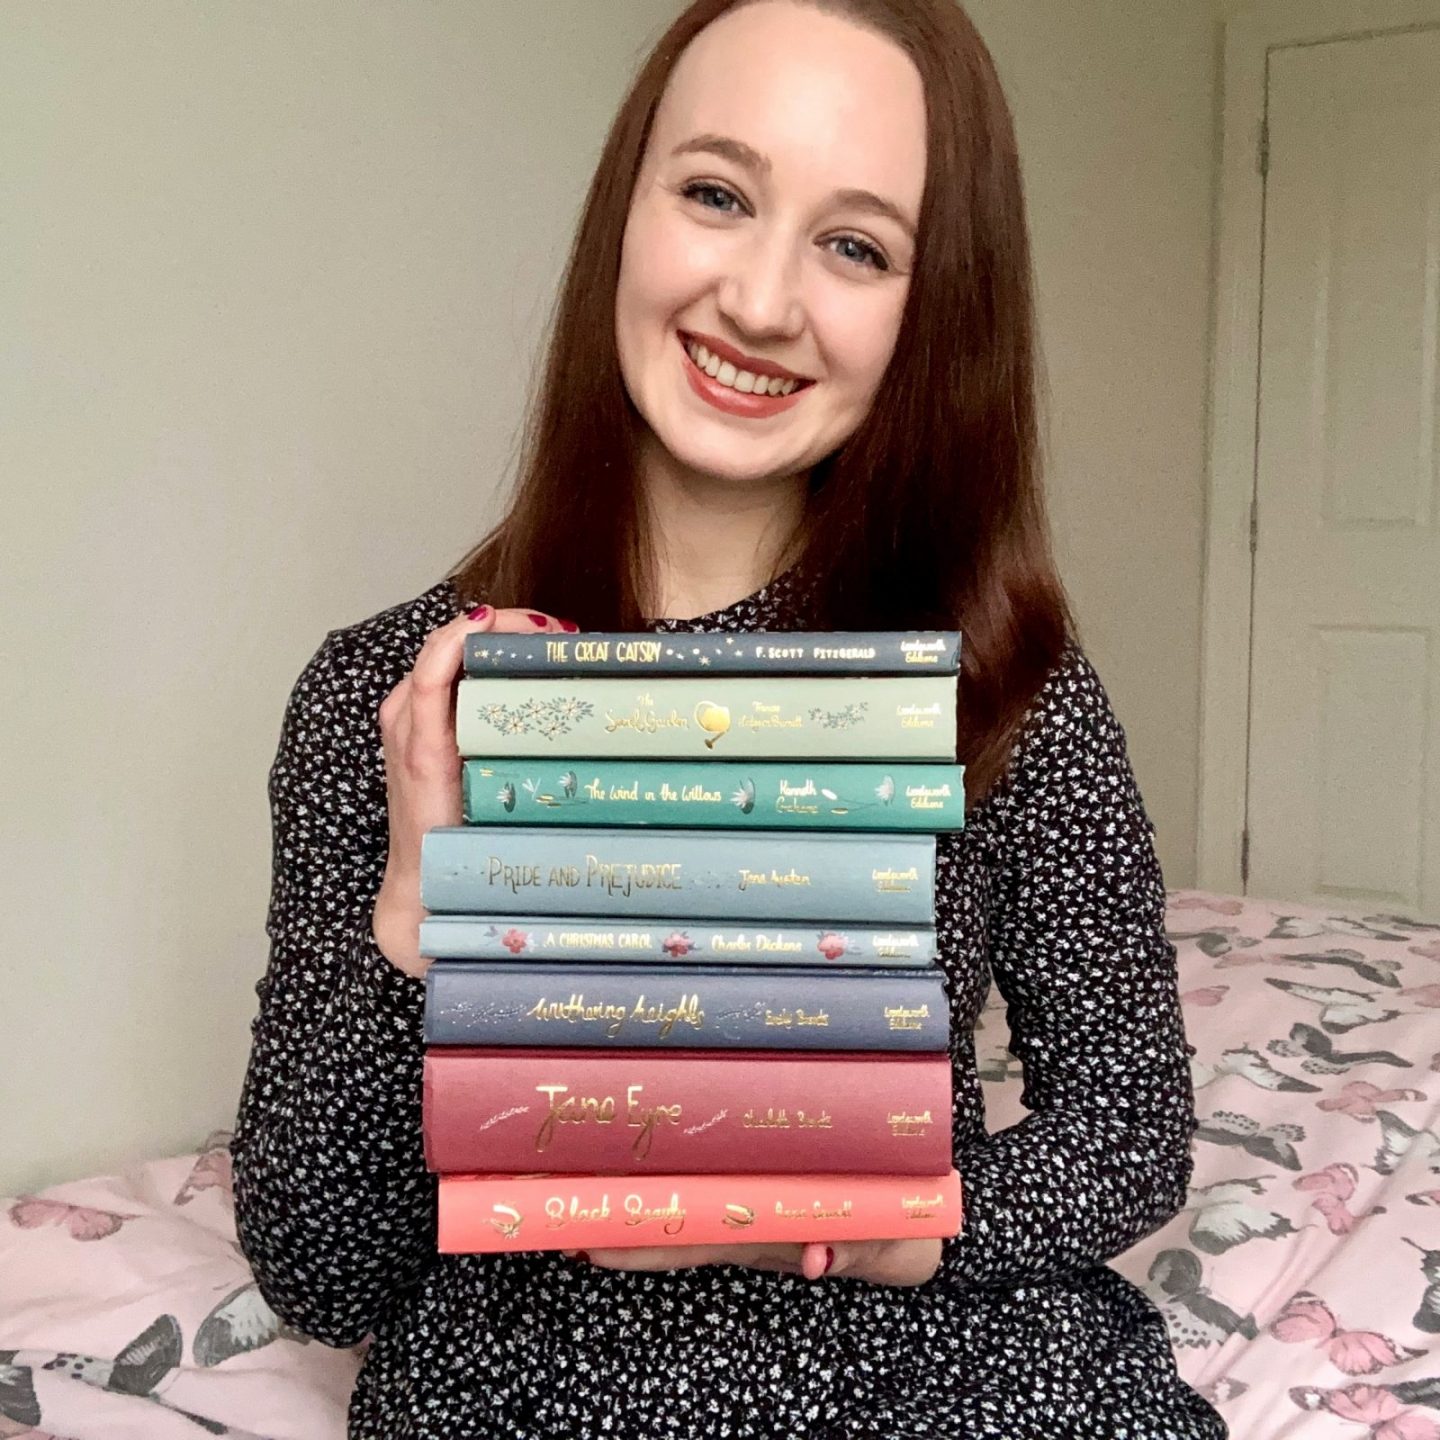 Pippa sat on edge of bed, holding up a huge pile of books and smiling. Pippa is wearing long-sleeved navy blue dress with tiny white spots, with brown hair down. Books are all classics from Wordsworth Collector’s Editions in a rainbow spectrum of pastel colours and titles embroidered in gold. Books top to bottom are The Great Gatsby, The Secret Garden, The Wind In The Willows, Pride and prejudice, a Christmas Carol, withering heights, Jane Eyre, and black beauty.￼￼